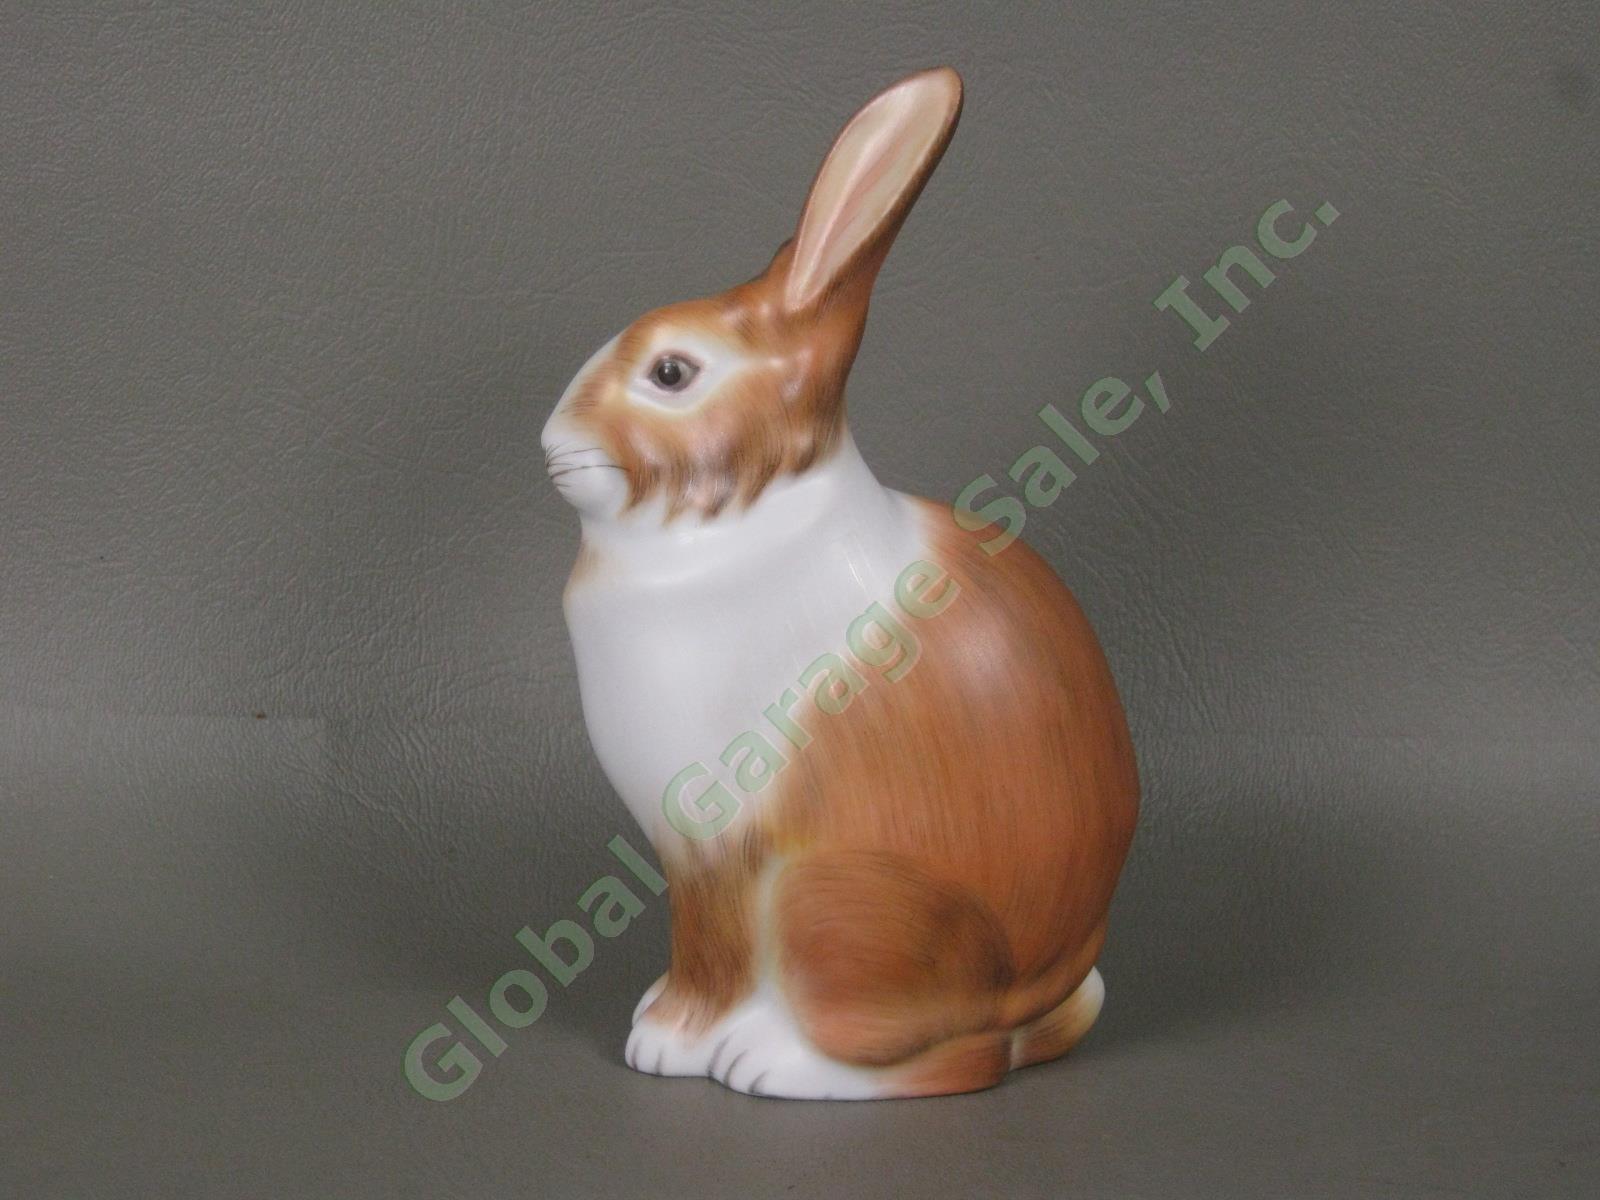 Herend Brown & White Handpainted 5.5" Porcelain Rabbit Figurine No Reserve Price 3